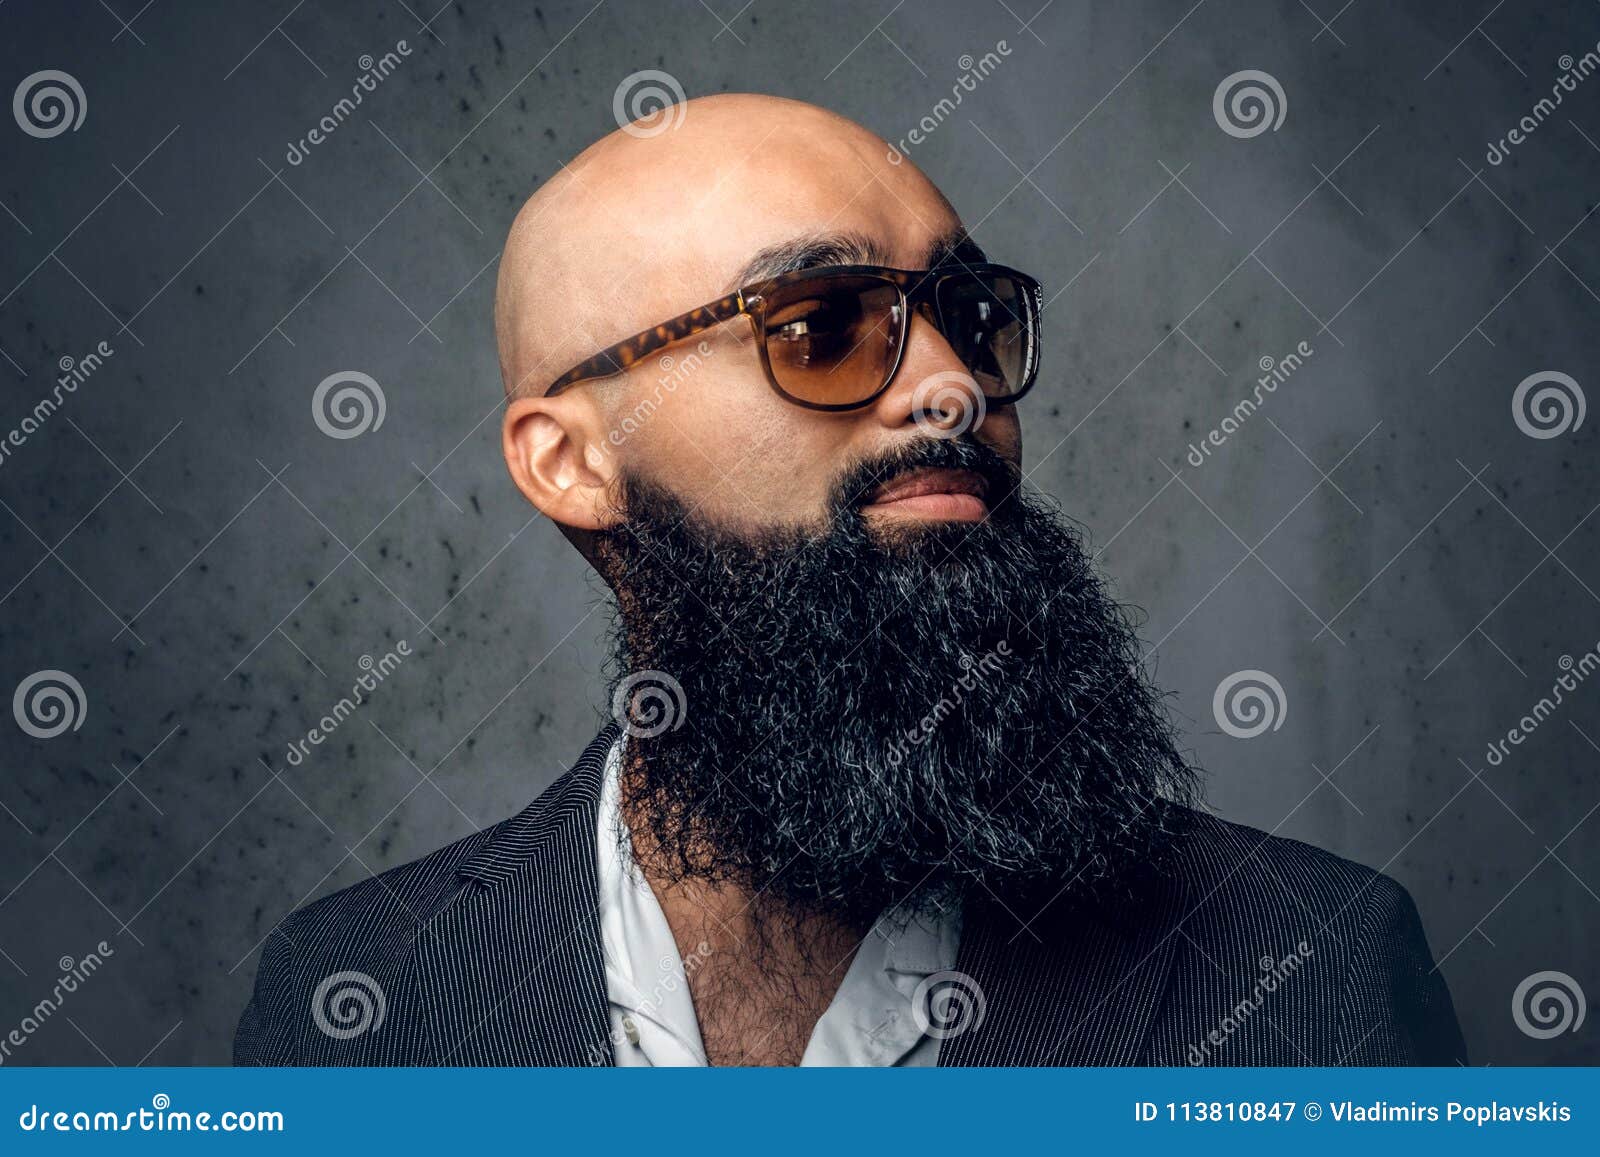 Arabic Bearded Shaved Head Male in Sunglasses. Stock Image - Image of  handsome, attractive: 113810847